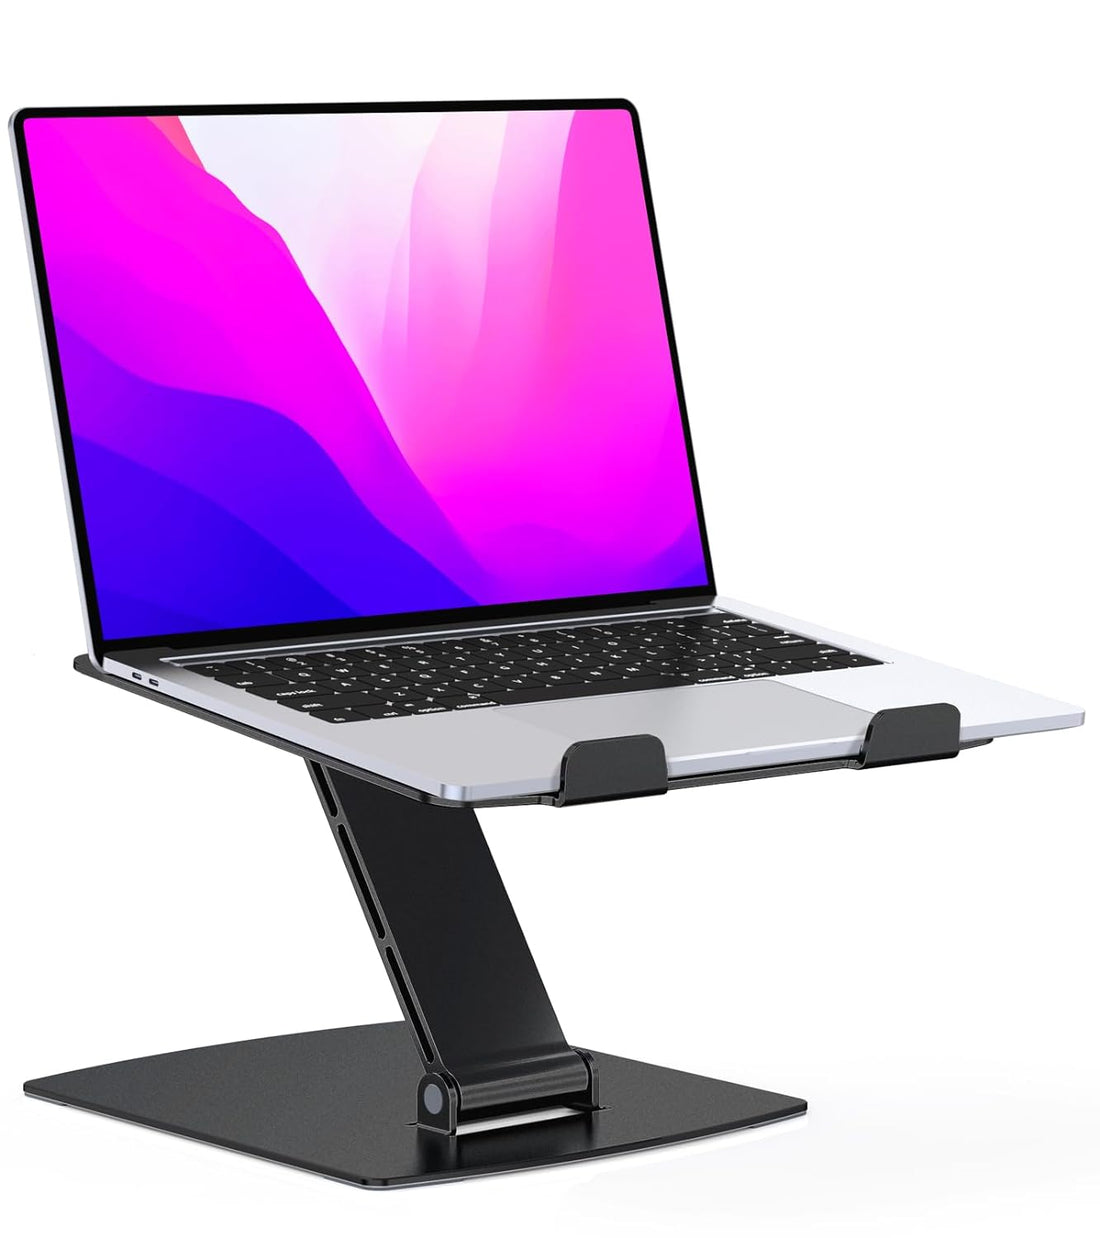 STOON Laptop Stand Adjustable Height, Ergonomic Portable Laptop Holder Riser for Desk, Aluminum Foldable Computer Notebook Stand Compatible with MacBook Air Pro, Dell XPS, HP (10-16") -Black